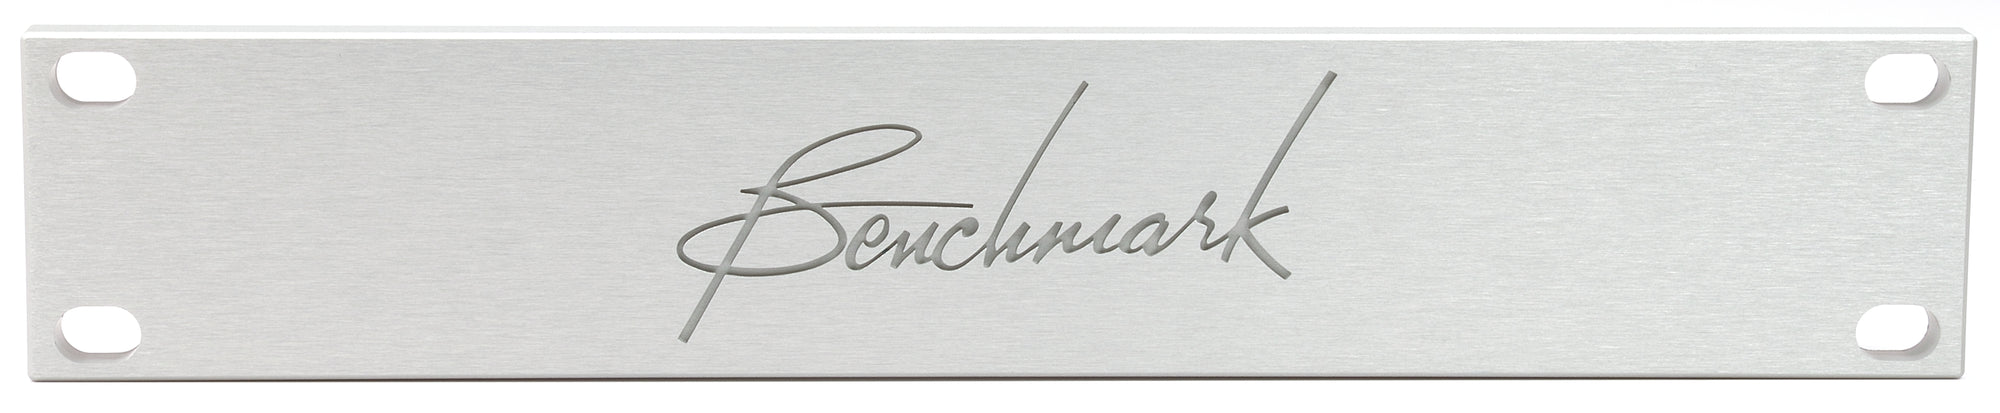 Premium Silver Blank Plate - Includes Engraved Benchmark Logo